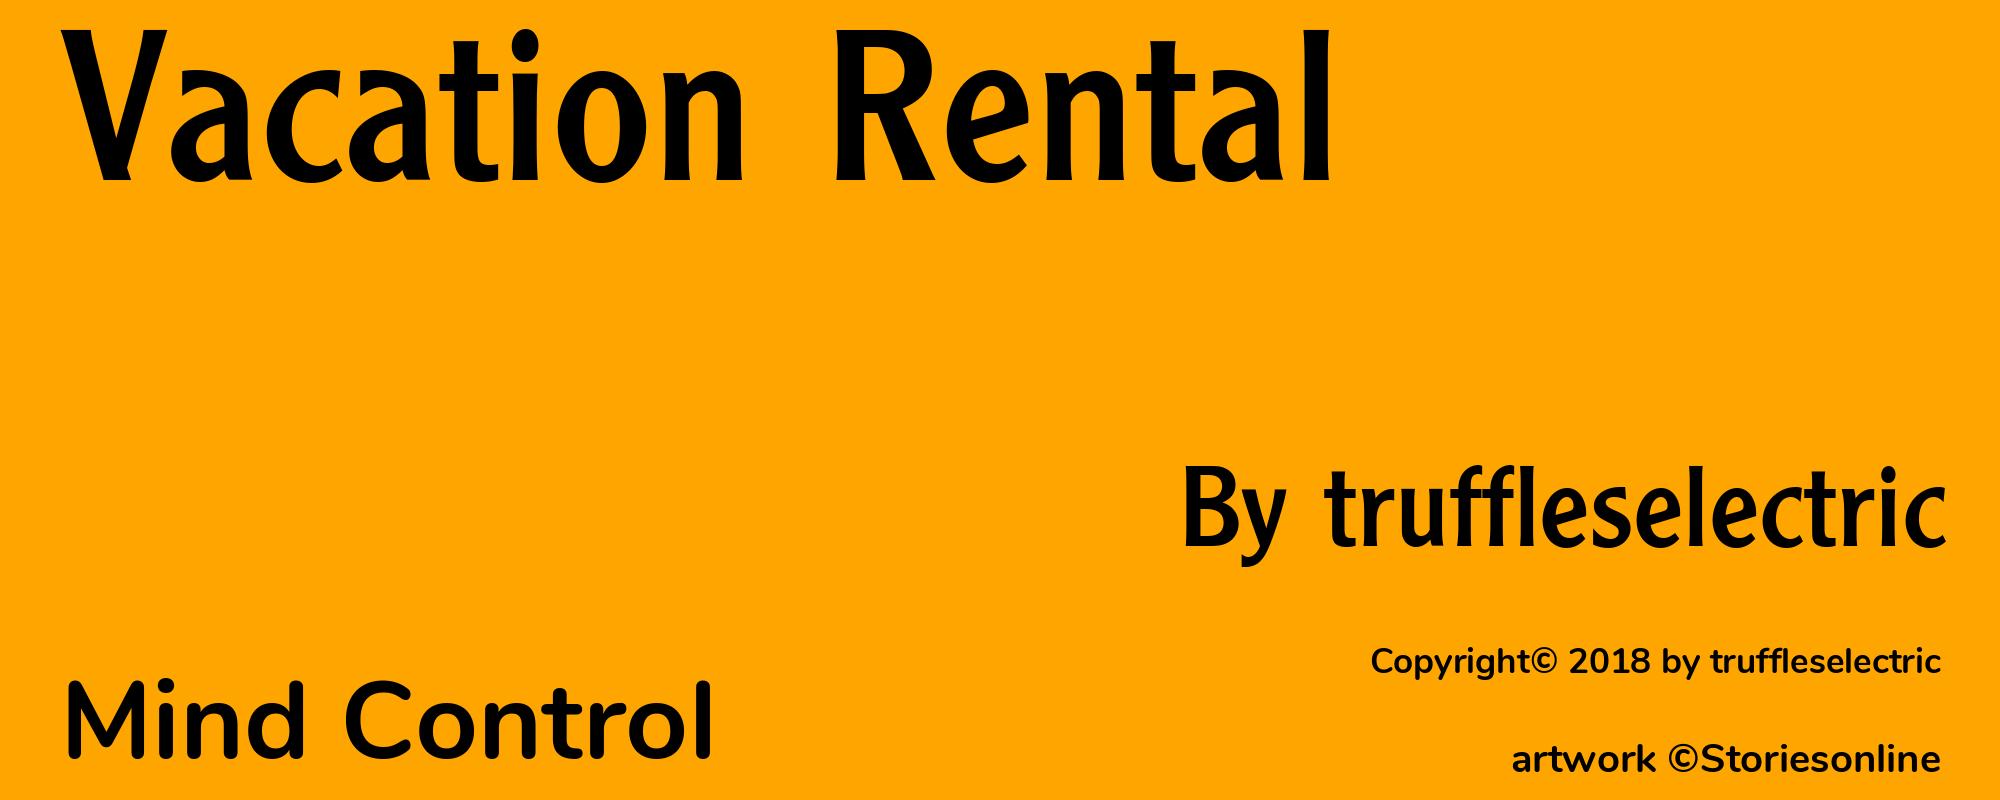 Vacation Rental - Cover